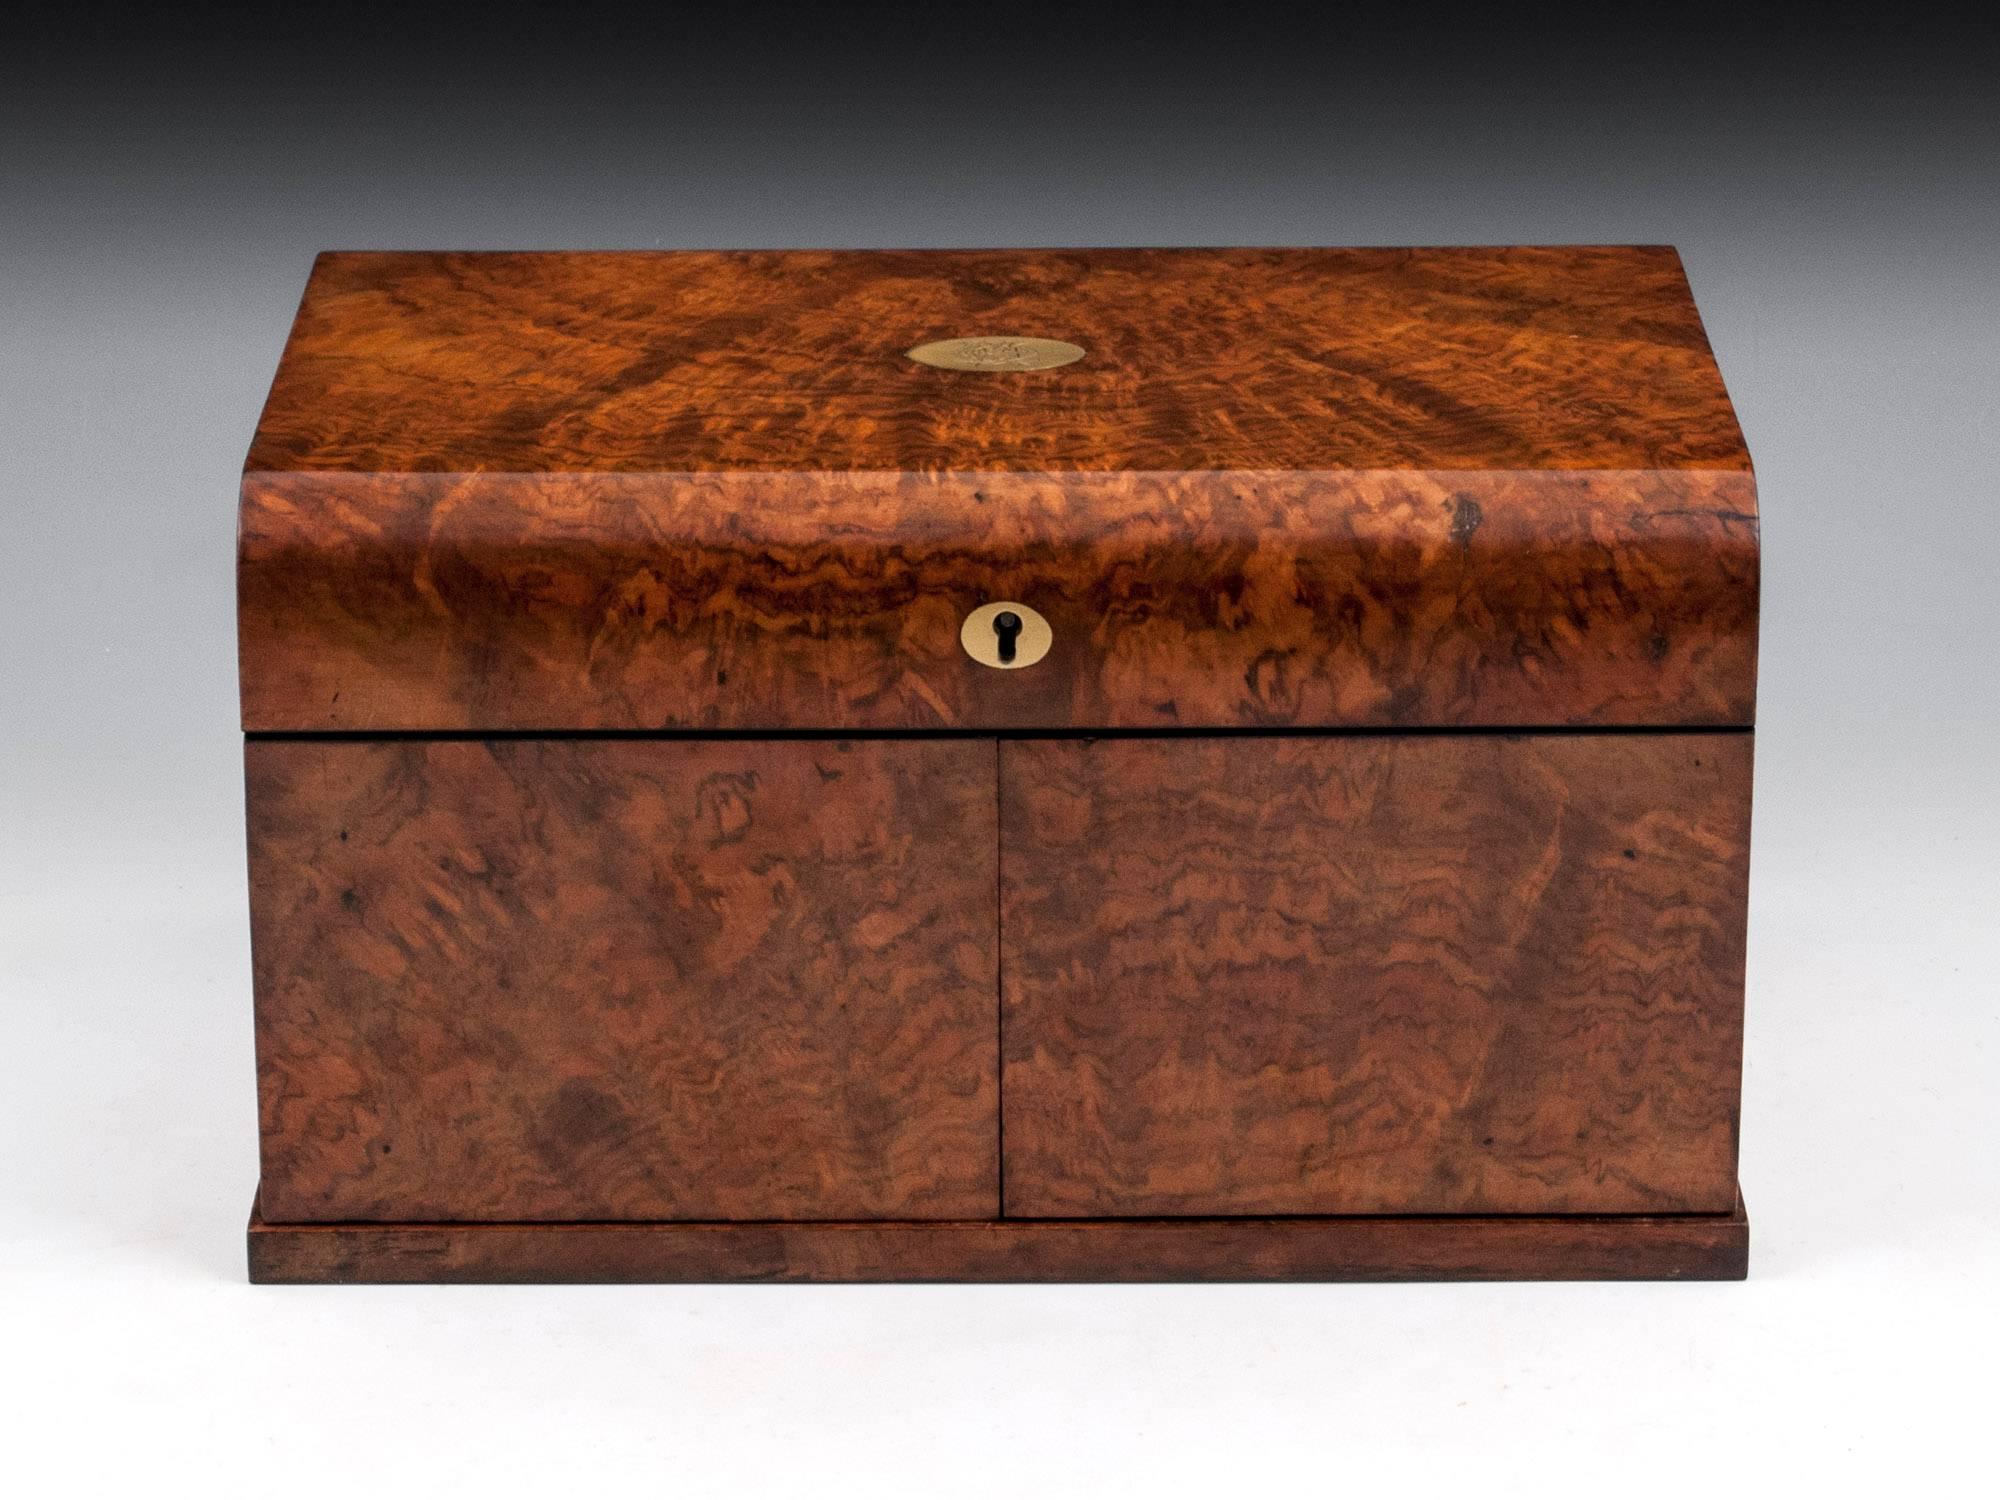 A stunning games compendium veneered in beautiful figured burr walnut with a satinwood interior and coromandel facings. The top lifts and the front doors swing open to reveal a Staunton natural and red stained bone chess set with three layers of